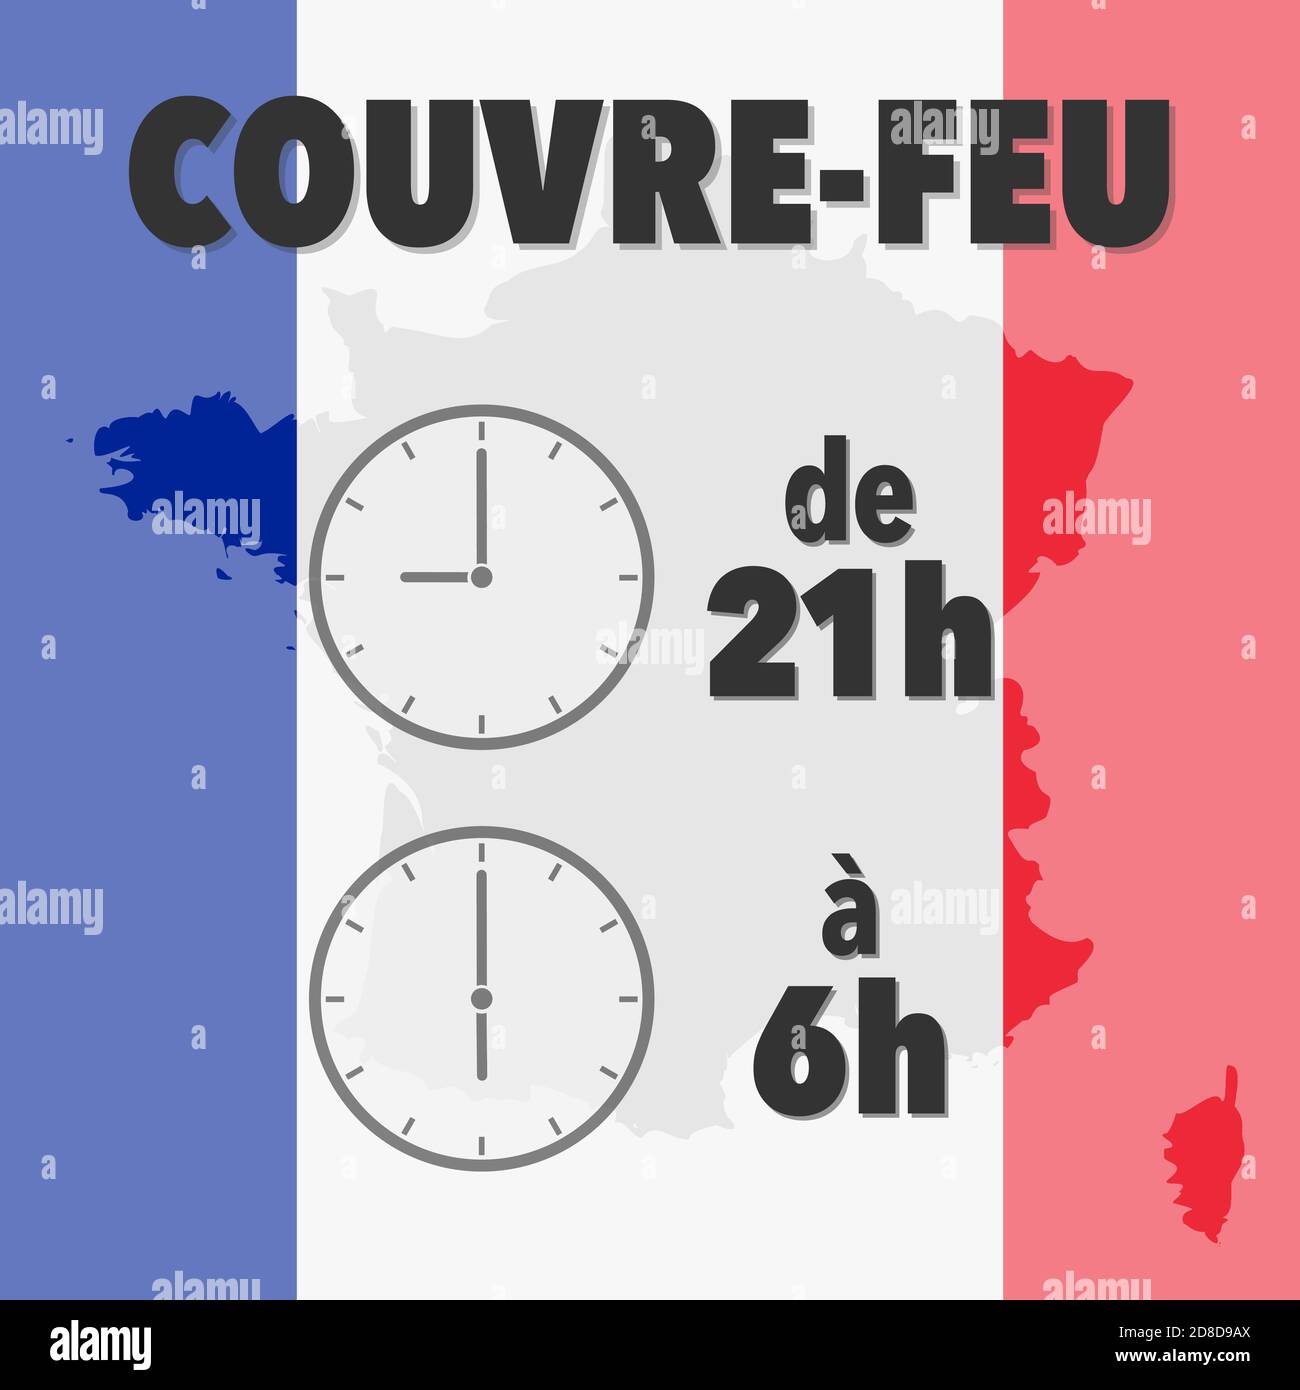 covid-19 coronavirus pandemic curfew from 21h to 6h, 9pm to 6am, in french language vector illustration Stock Vector